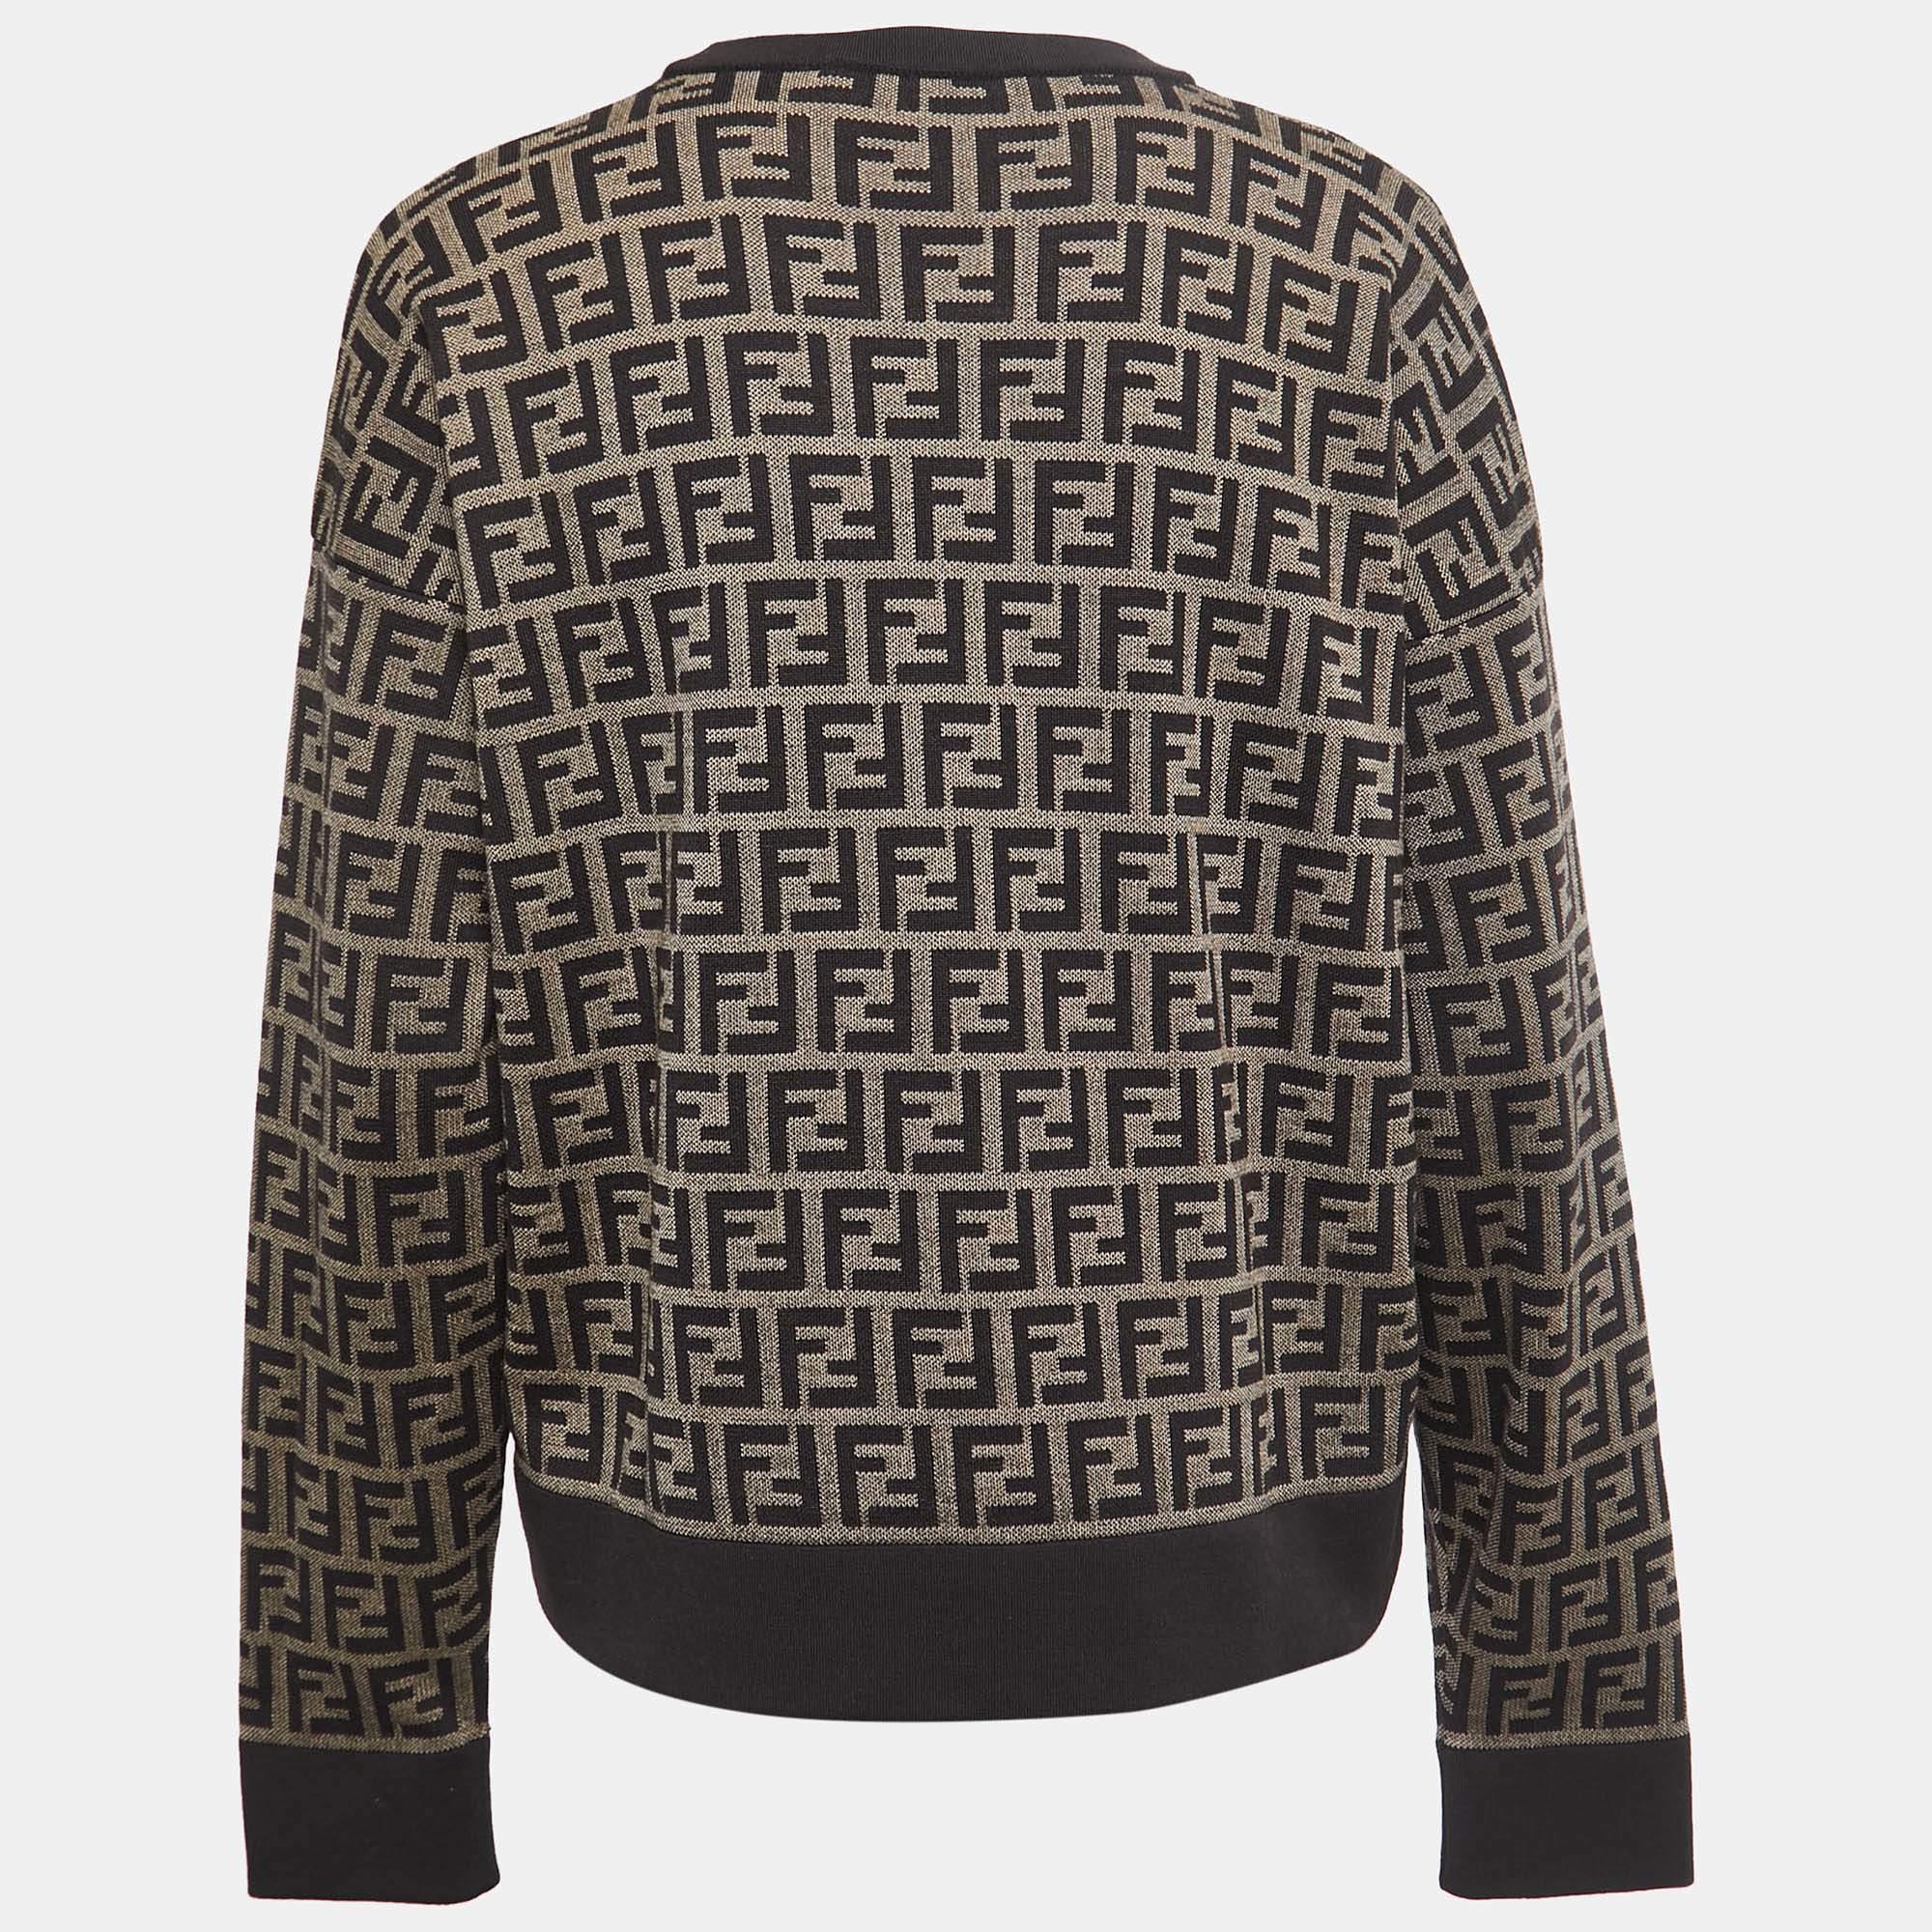 This sweatshirt from Fendi X Versace will help you achieve a smart-casual style like no other. It has been creatively tailored from quality fabric and displays a lovely shade.

Includes: Brand tag